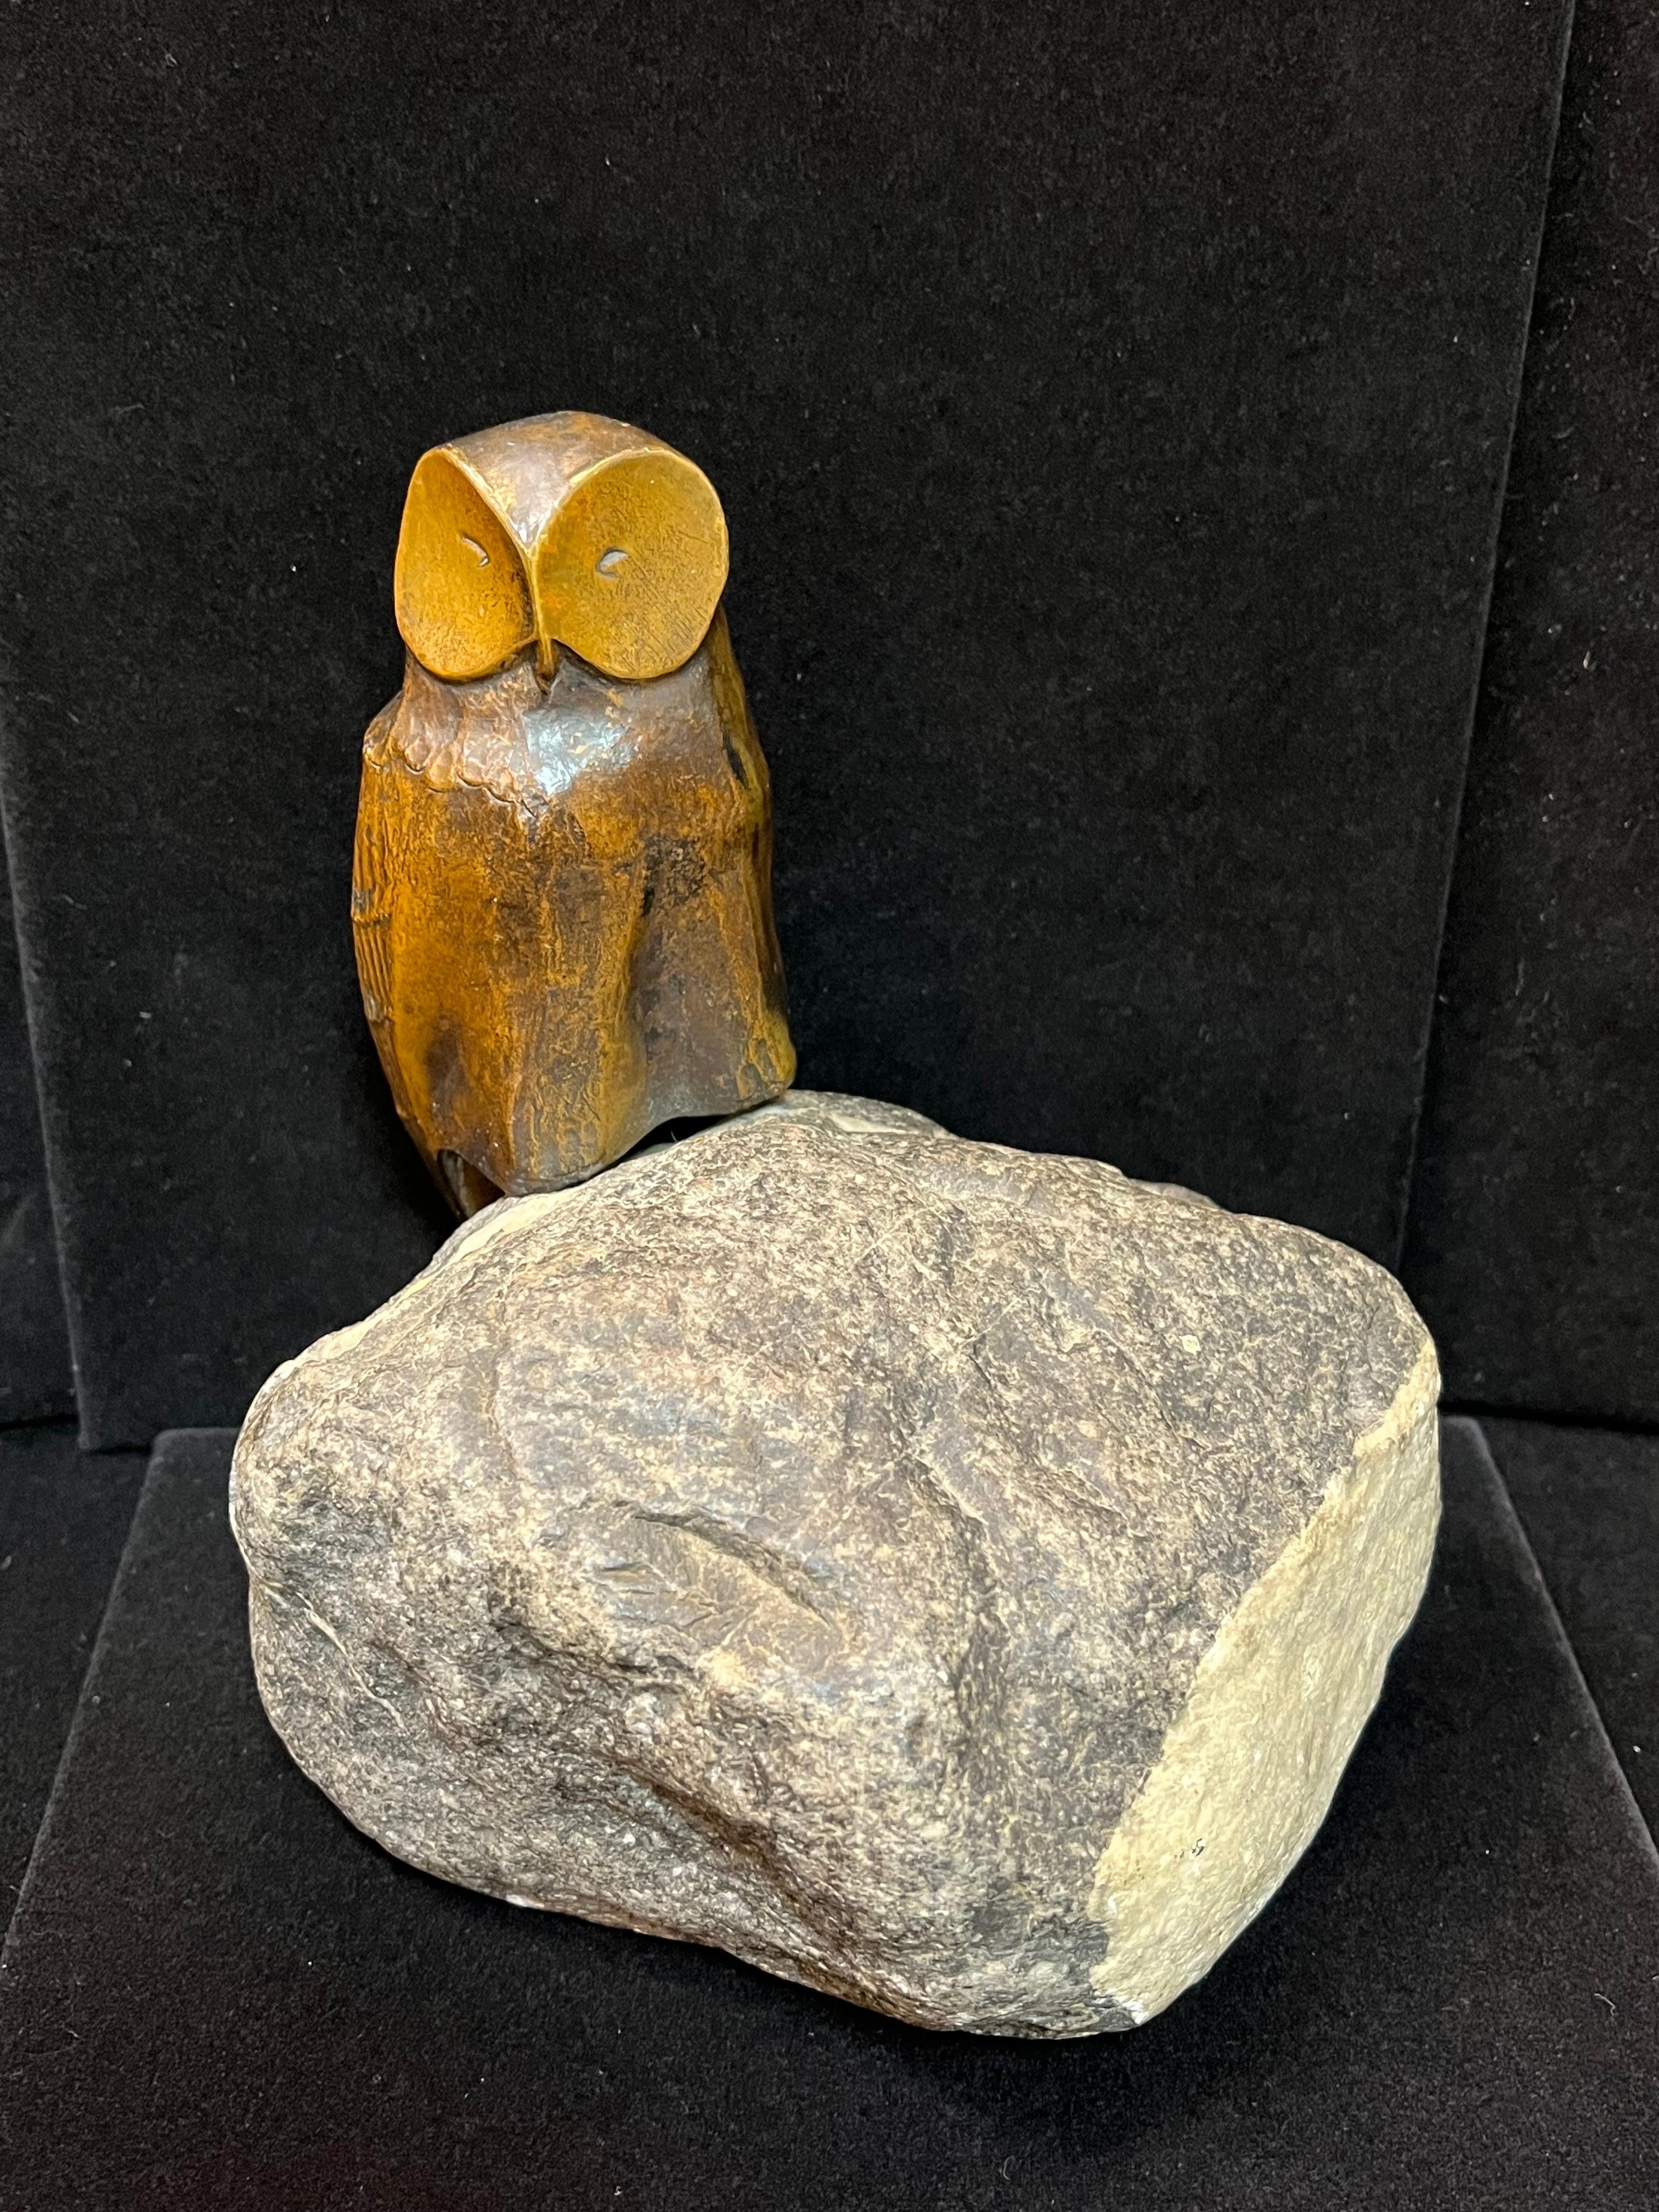 A sculpted bronze Art Deco style owl perched on a natural stone by artist Charles Reussner (1886 - 1961). This wise old owl is on the side of the natural form rock, shades of stone with white contrast beautifully with the rich, warm patina of the